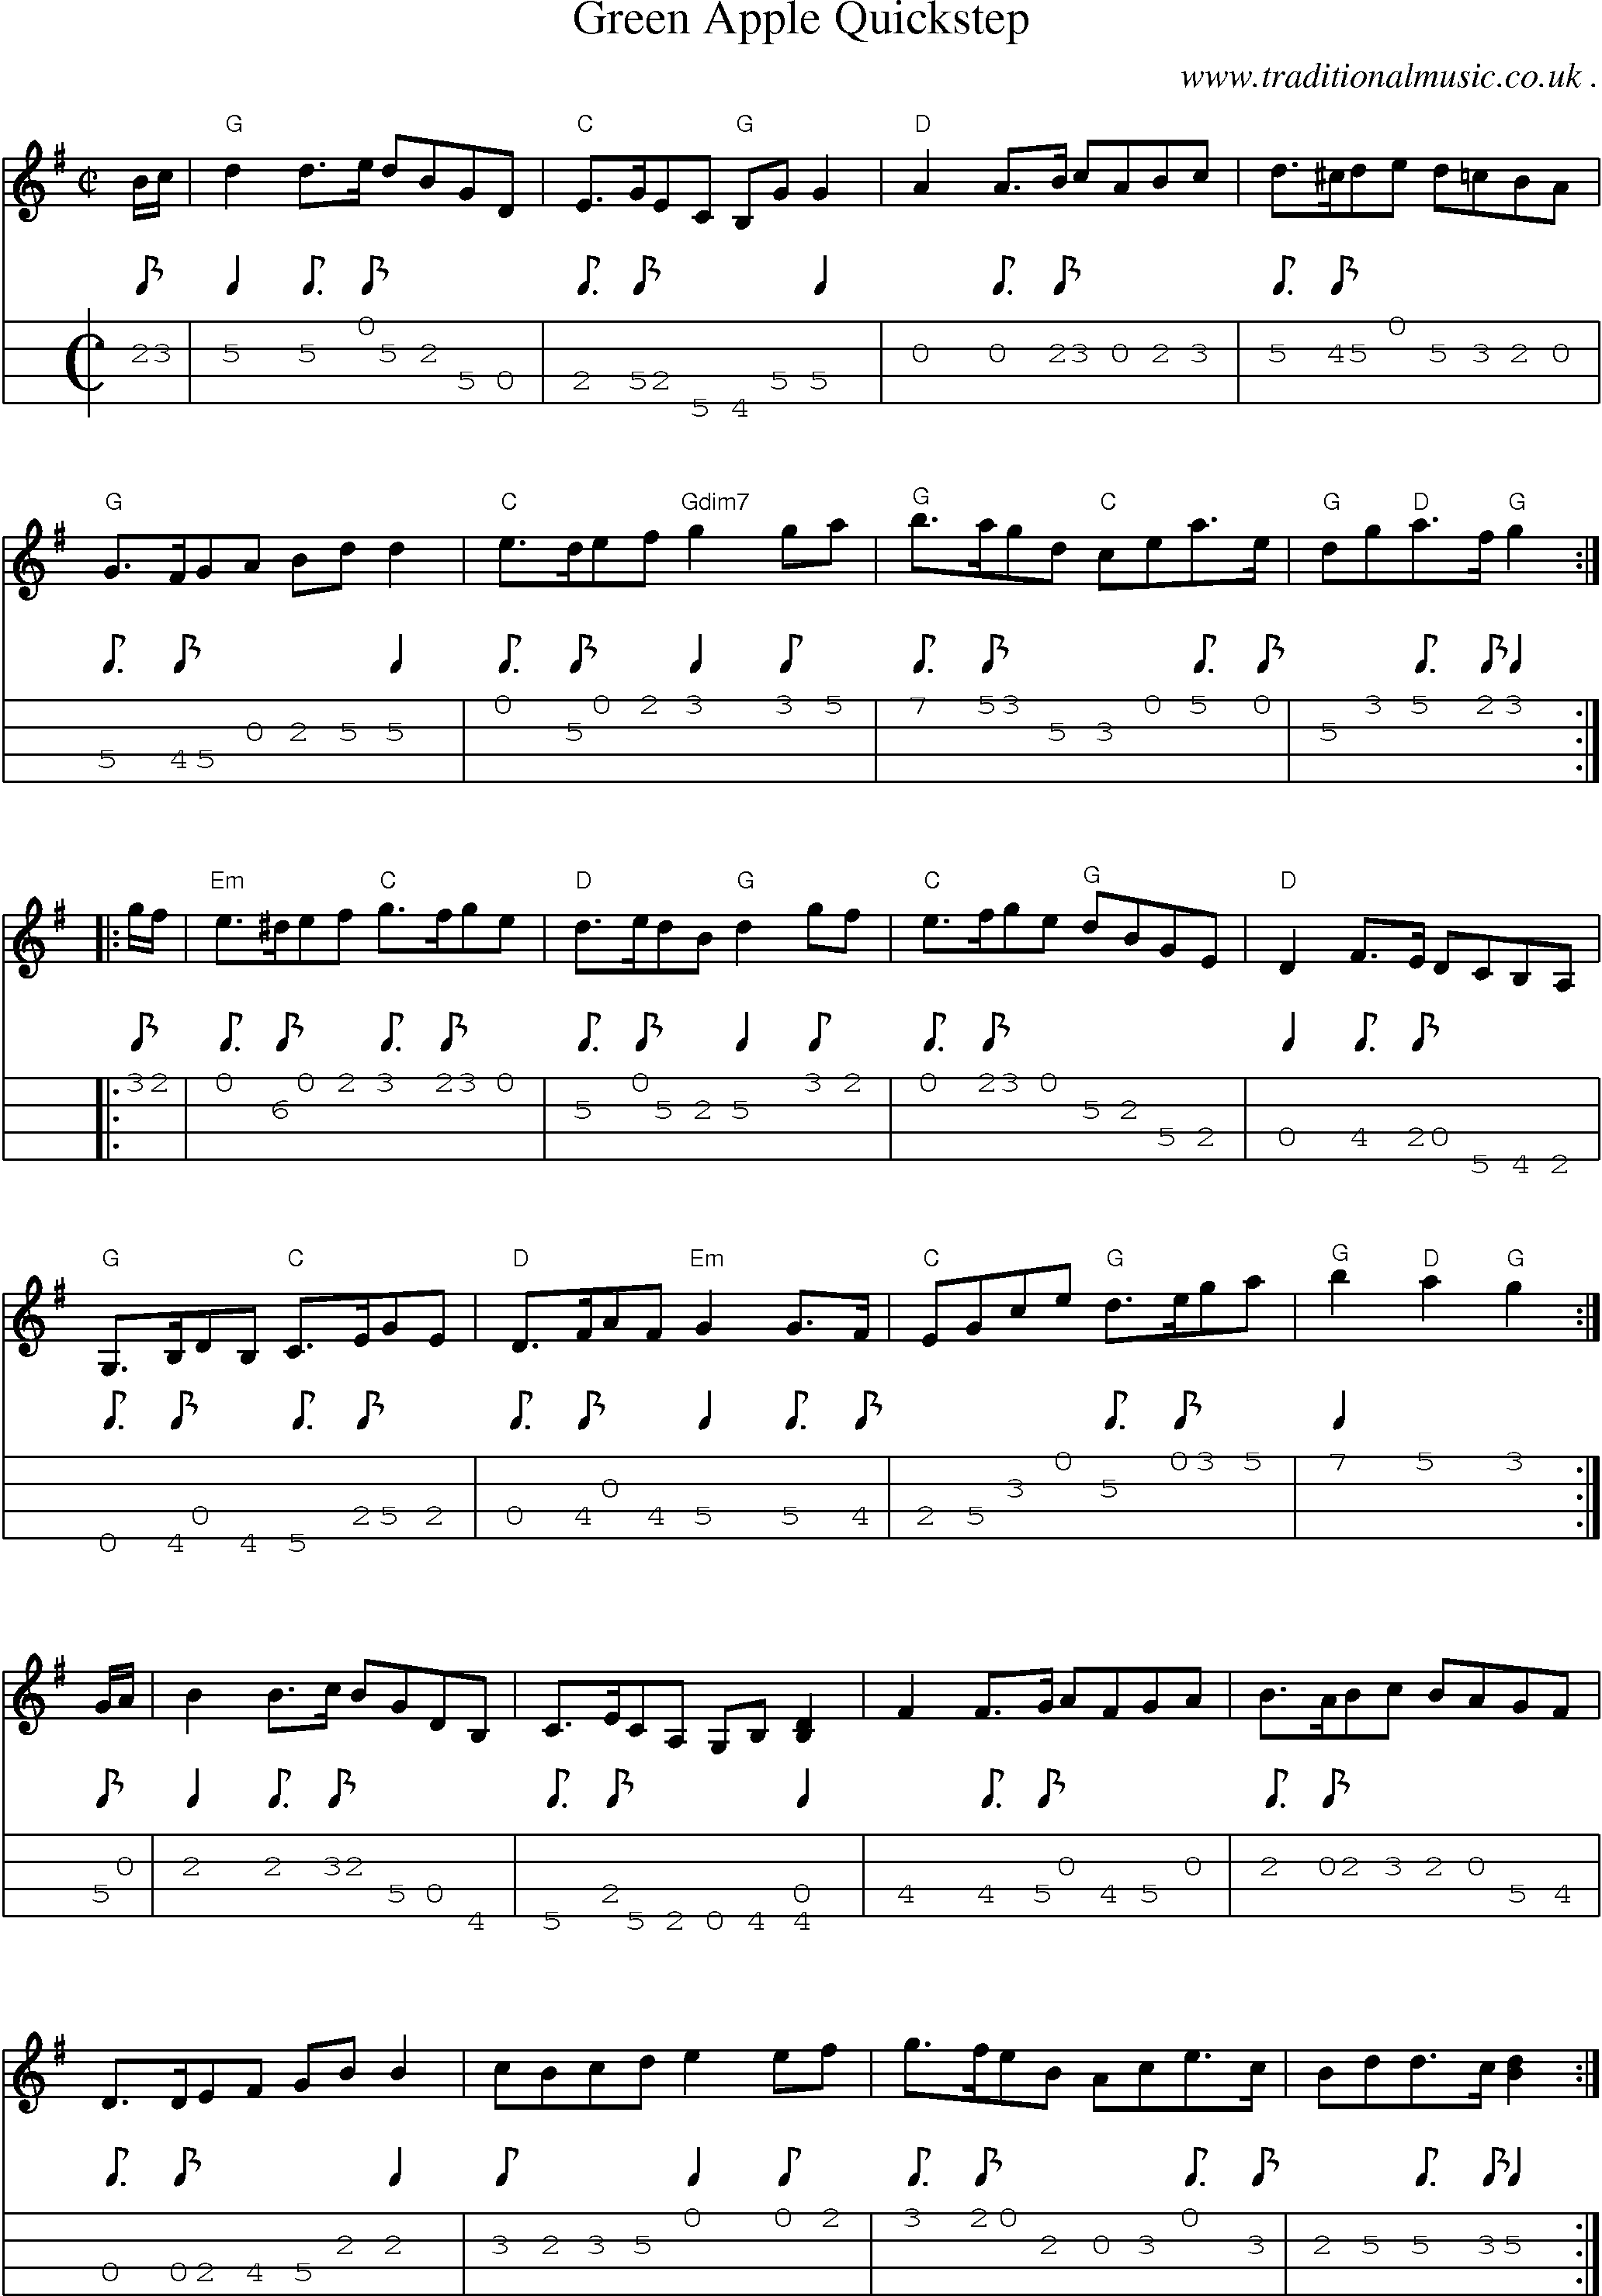 Music Score and Mandolin Tabs for Green Apple Quickstep